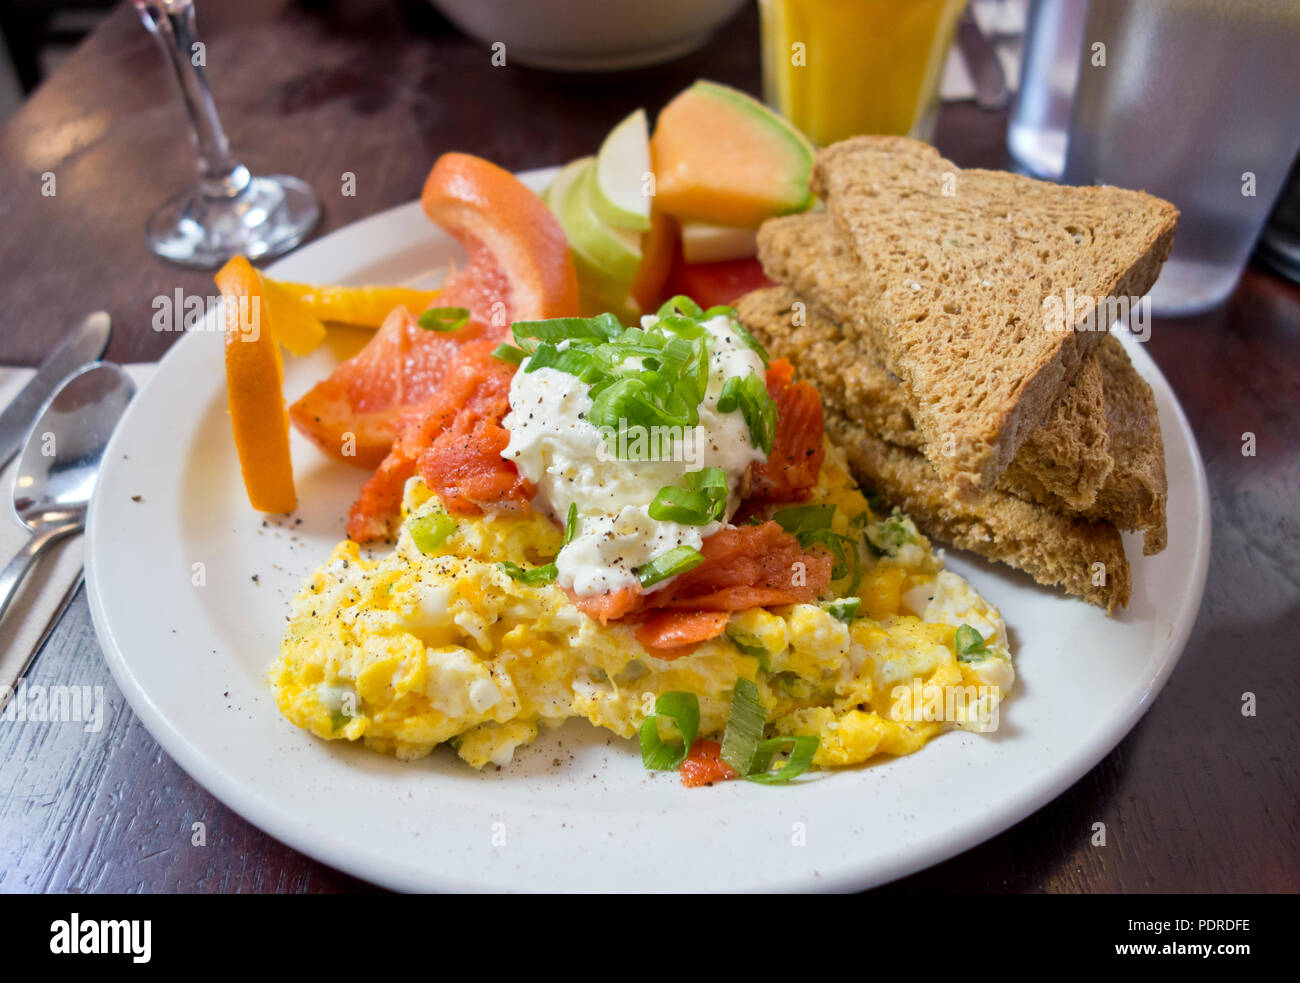 Delicious breakfast with scrambled eggs, smoked salmon,toast, and fruit. Served at Mole Cafe in Victoria, BC, Canada. Stock Photo